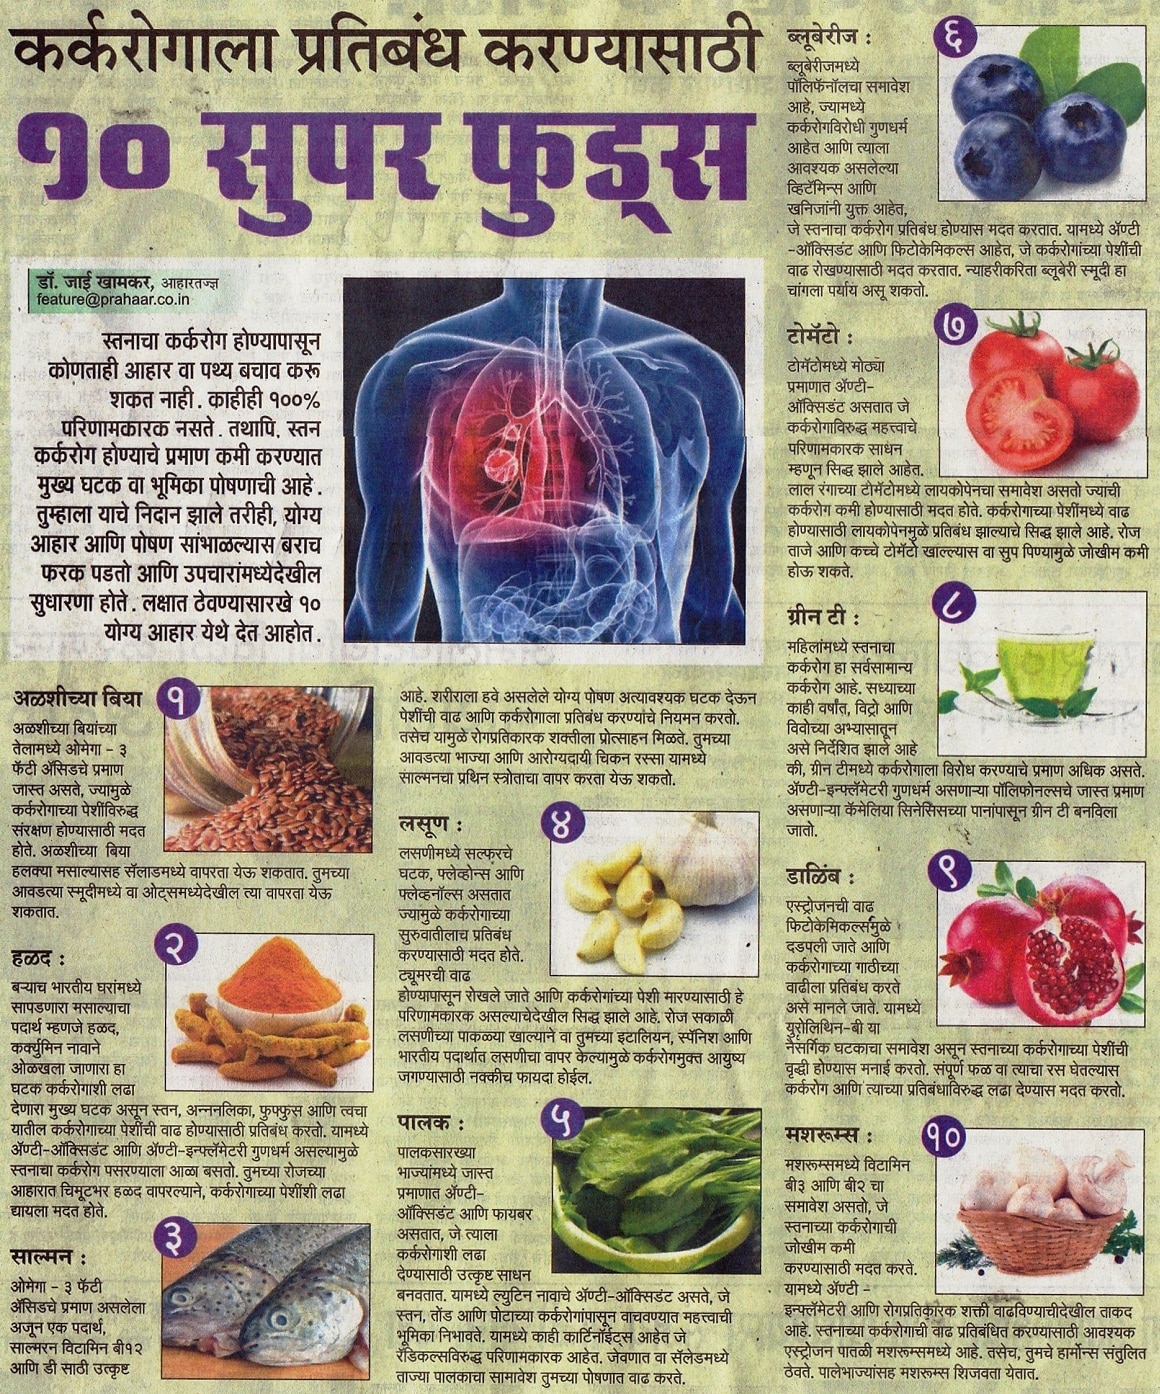 10 Super Foods to Avoid Breast Cancer